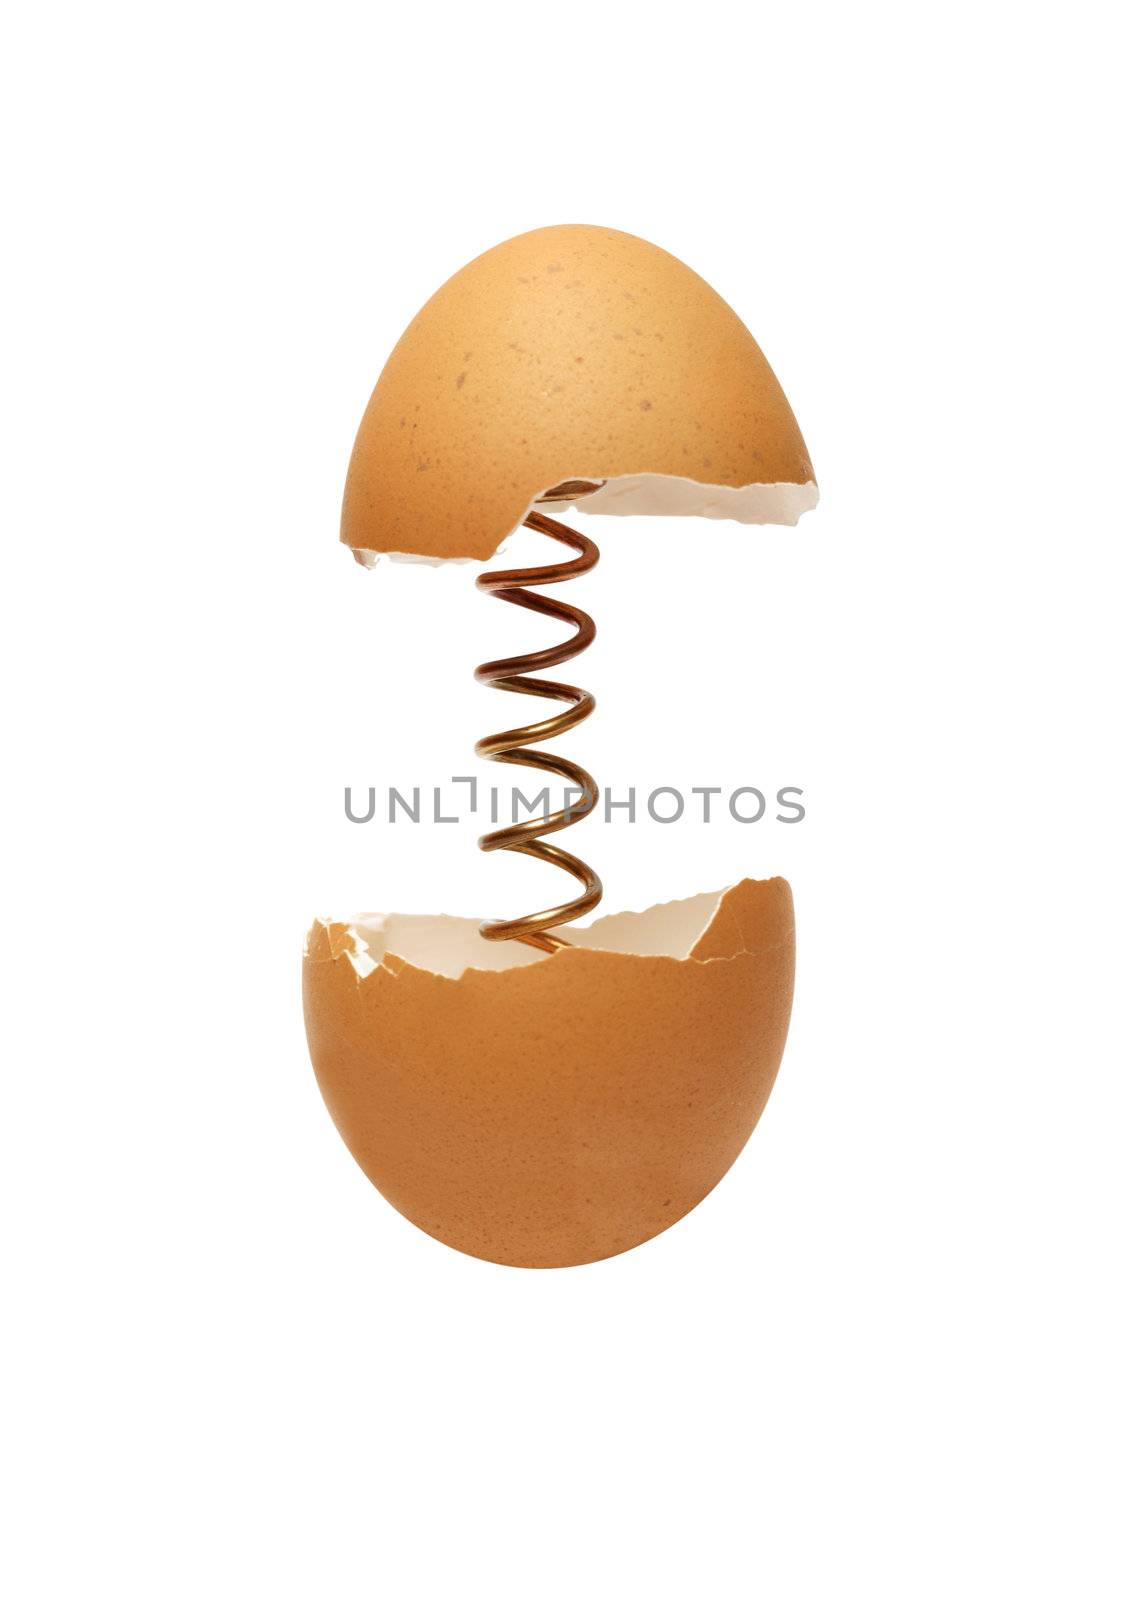 Metal spring inside broken egg. Isolated on white with clipping path